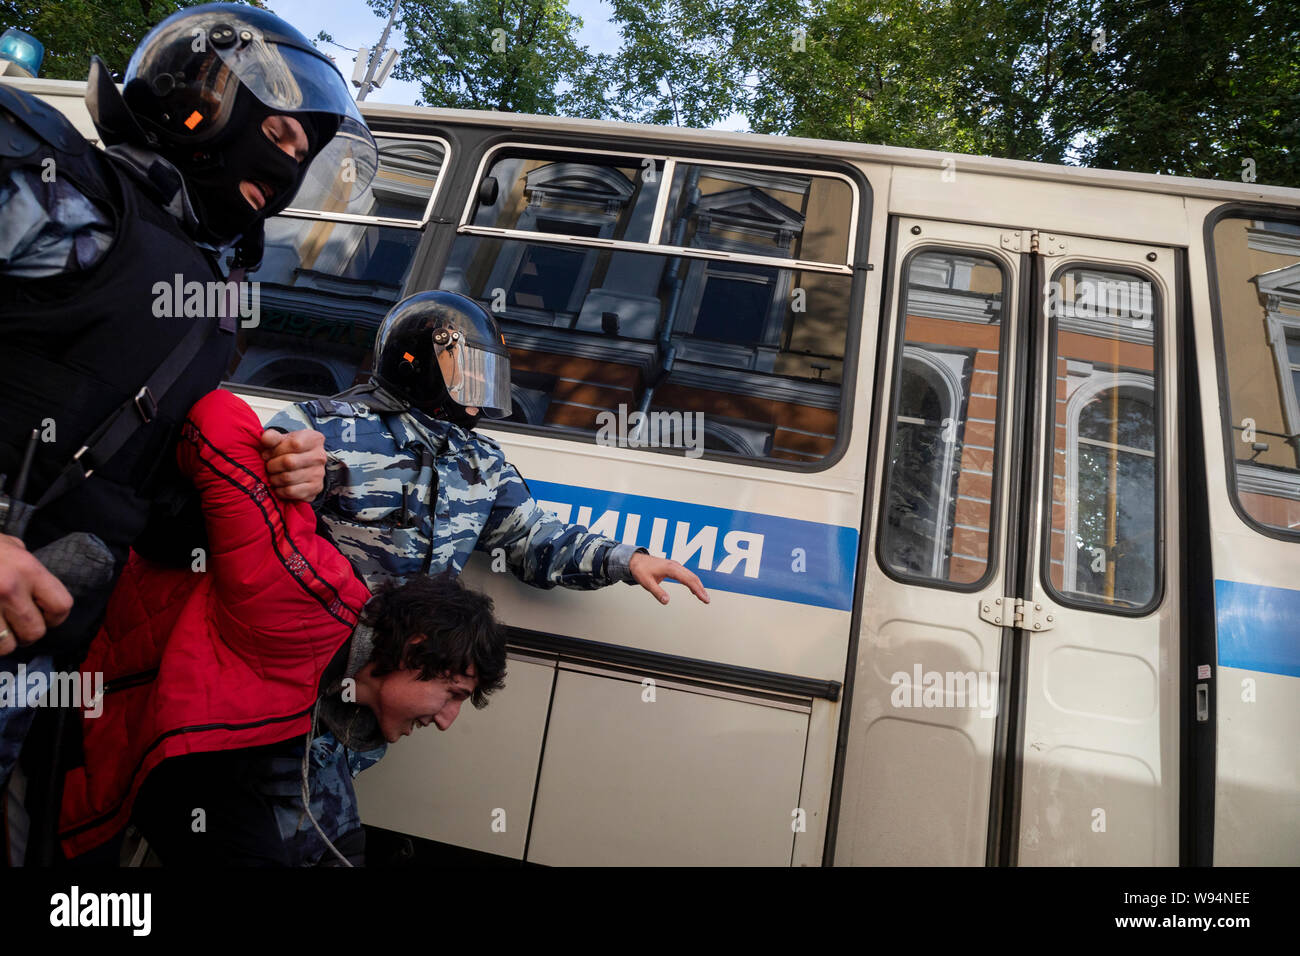 Moscow, Russia. 10th, August, 2019 Riot police officers detain a participant of an unsanctioned rally urging fair elections in Moscow, Russia. Tens of thousands of people rallied Saturday against the exclusion of some city council candidates from Moscow's upcoming election, turning out for one of the Russian capital's biggest political protests in years. After the rally, which was officially sanctioned, hundreds of participants streamed to an area near the presidential administration building to continue with an unauthorized demonstration Stock Photo